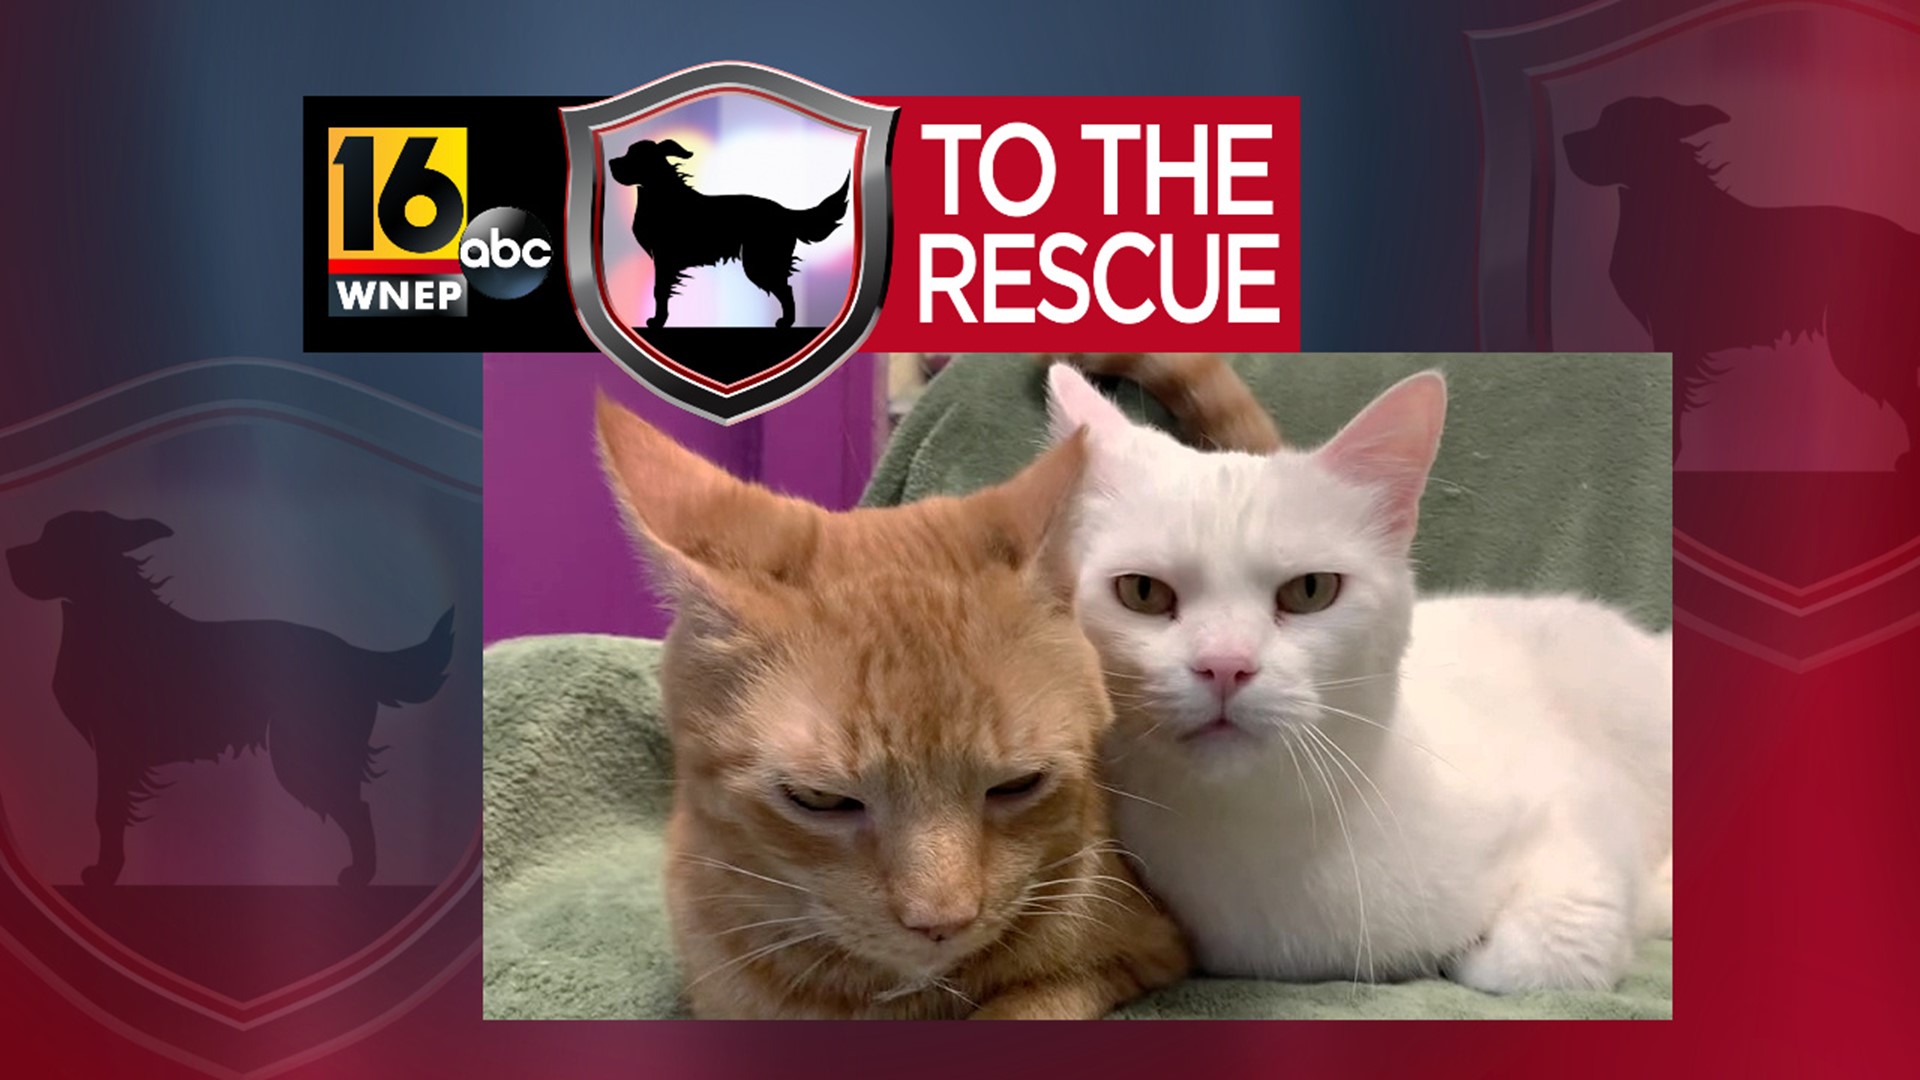 In this week's 16 To The Rescue, we meet two cats who are best friends and need to be adopted together, which is why they often get overlooked.